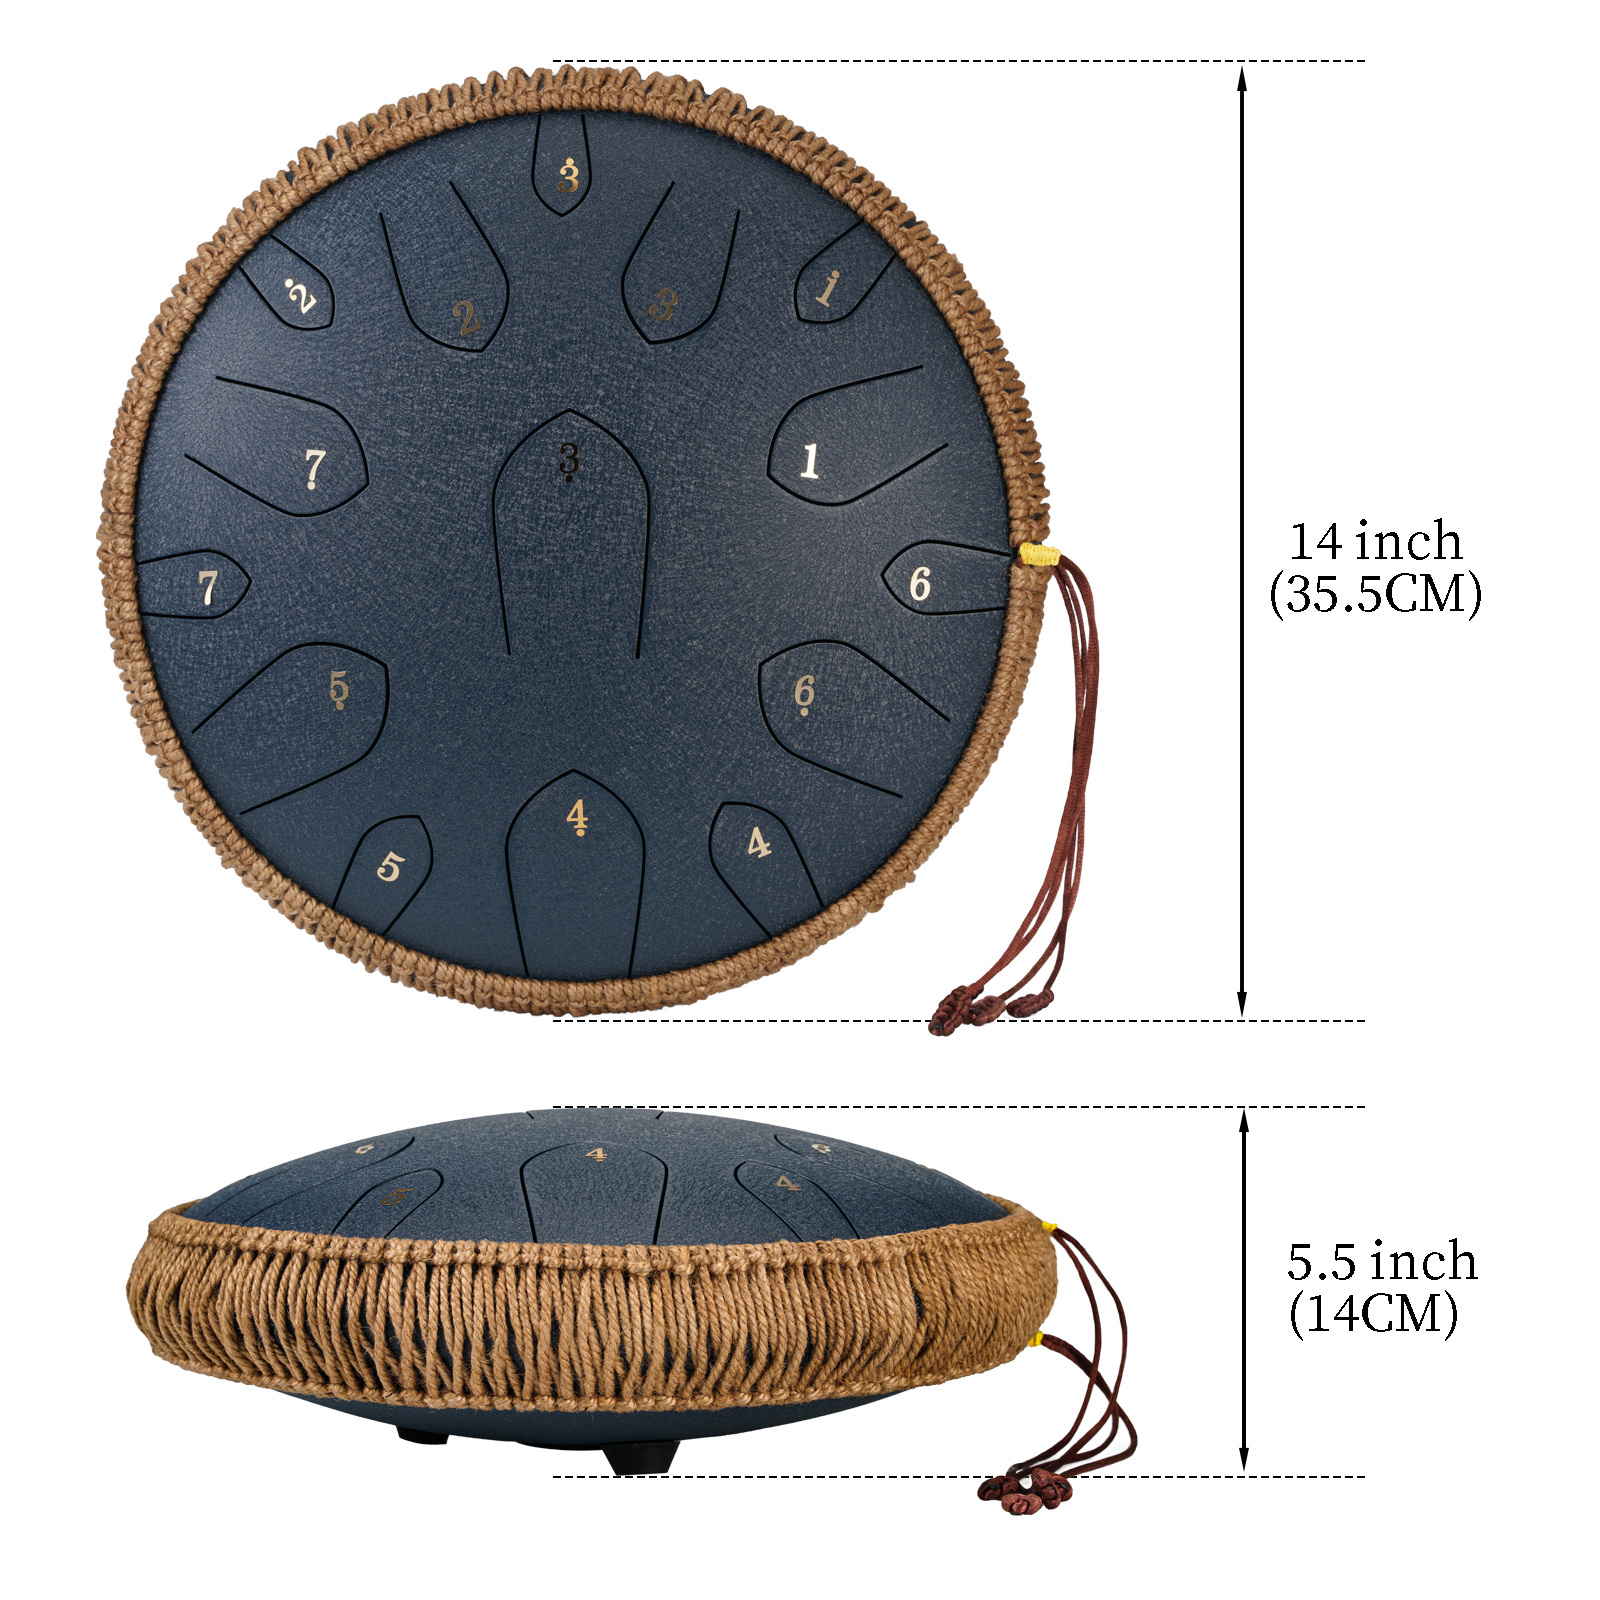 Steel Tongue Drum 15 Notes 14 Inches Panda Drum Handpan Drum Percussion  Instrument Wide Range Tank Drum with Padded Travel Bag, for Meditation